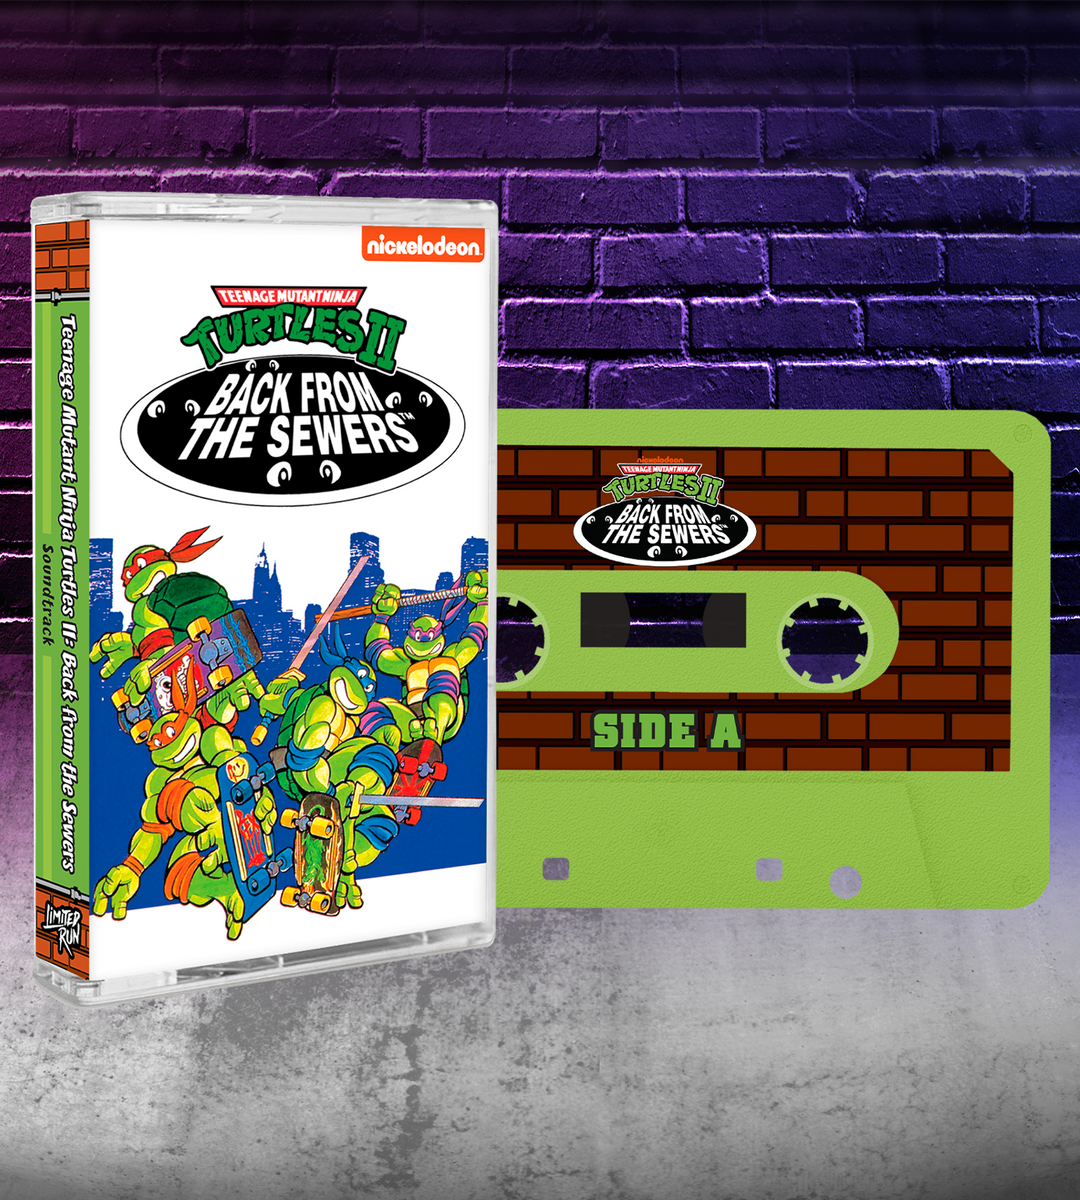 TMNT Video Game Soundtrack Is Coming To Vinyl, CD & Cassette Tape